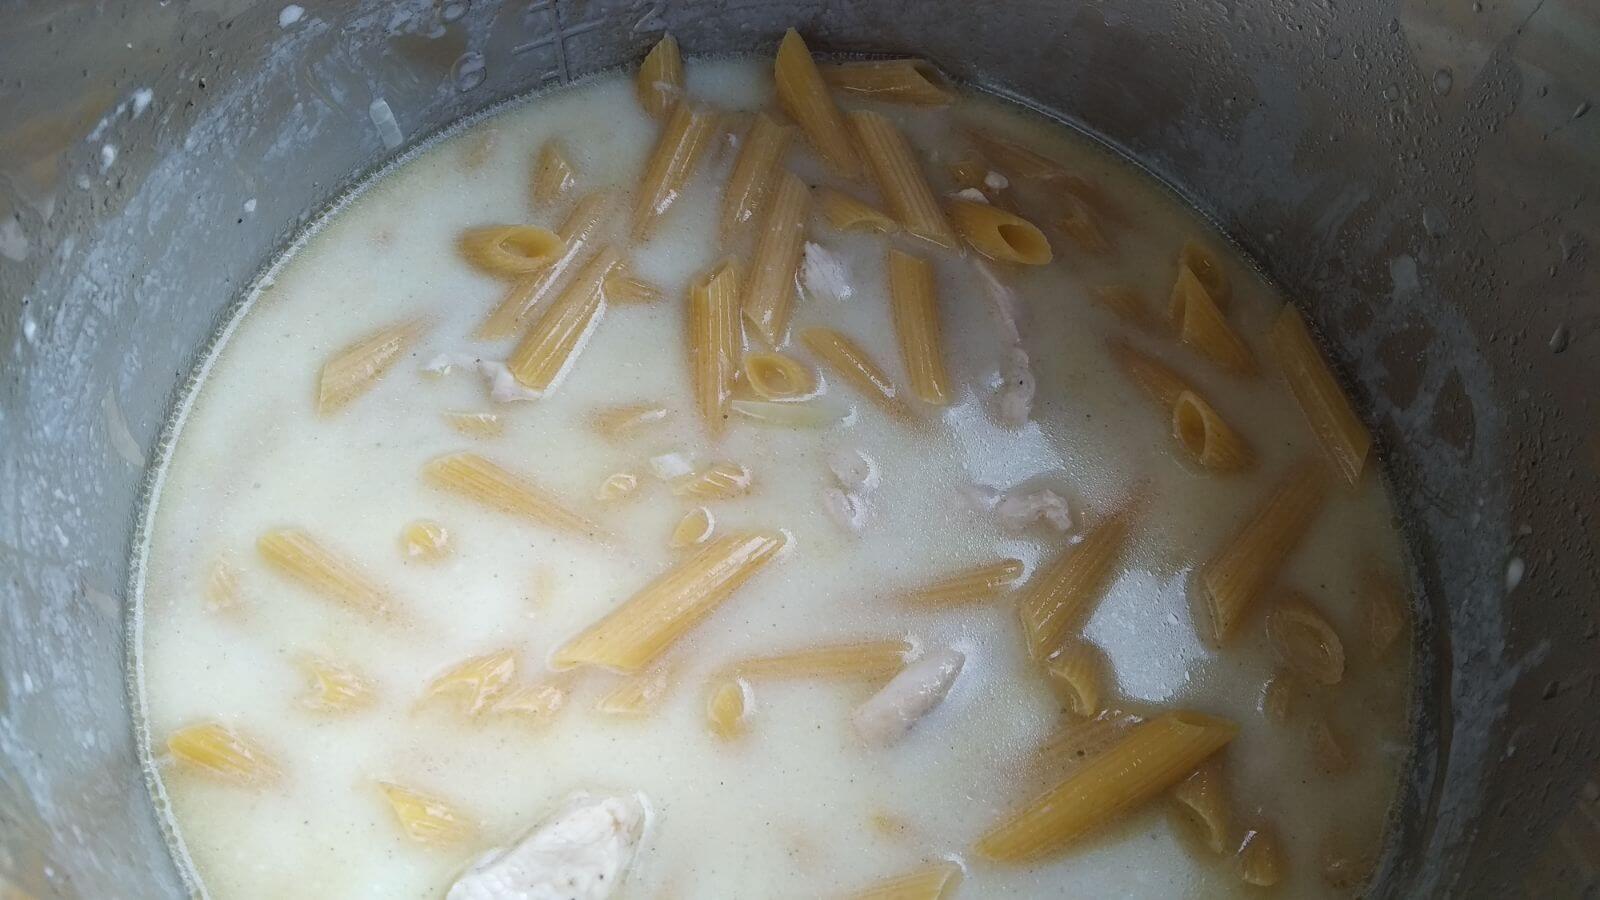 cheese sauce and raw pasta inside instan pot prior to cooking